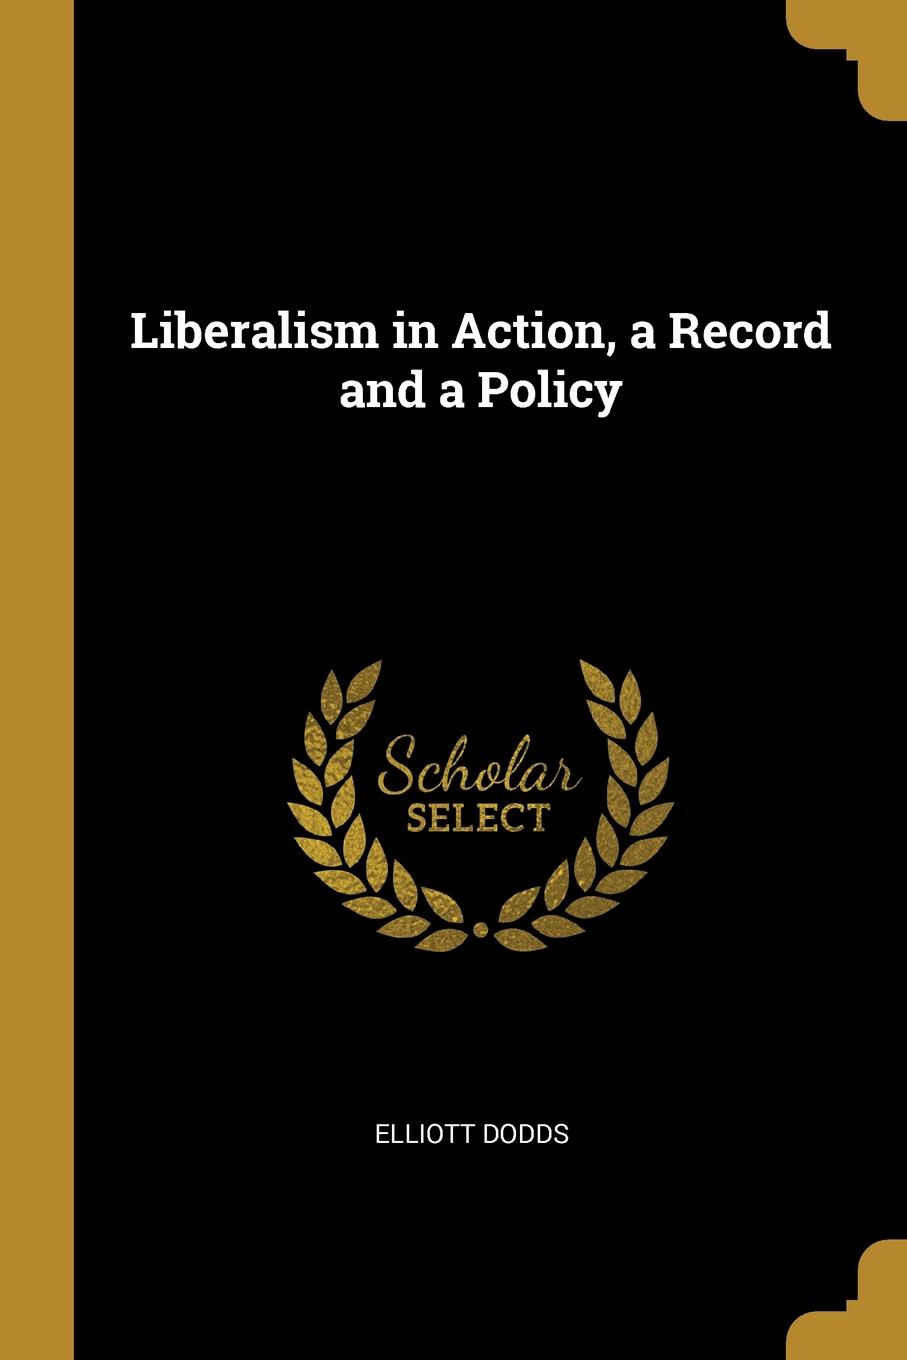 Liberalism in Action, a Record and a Policy